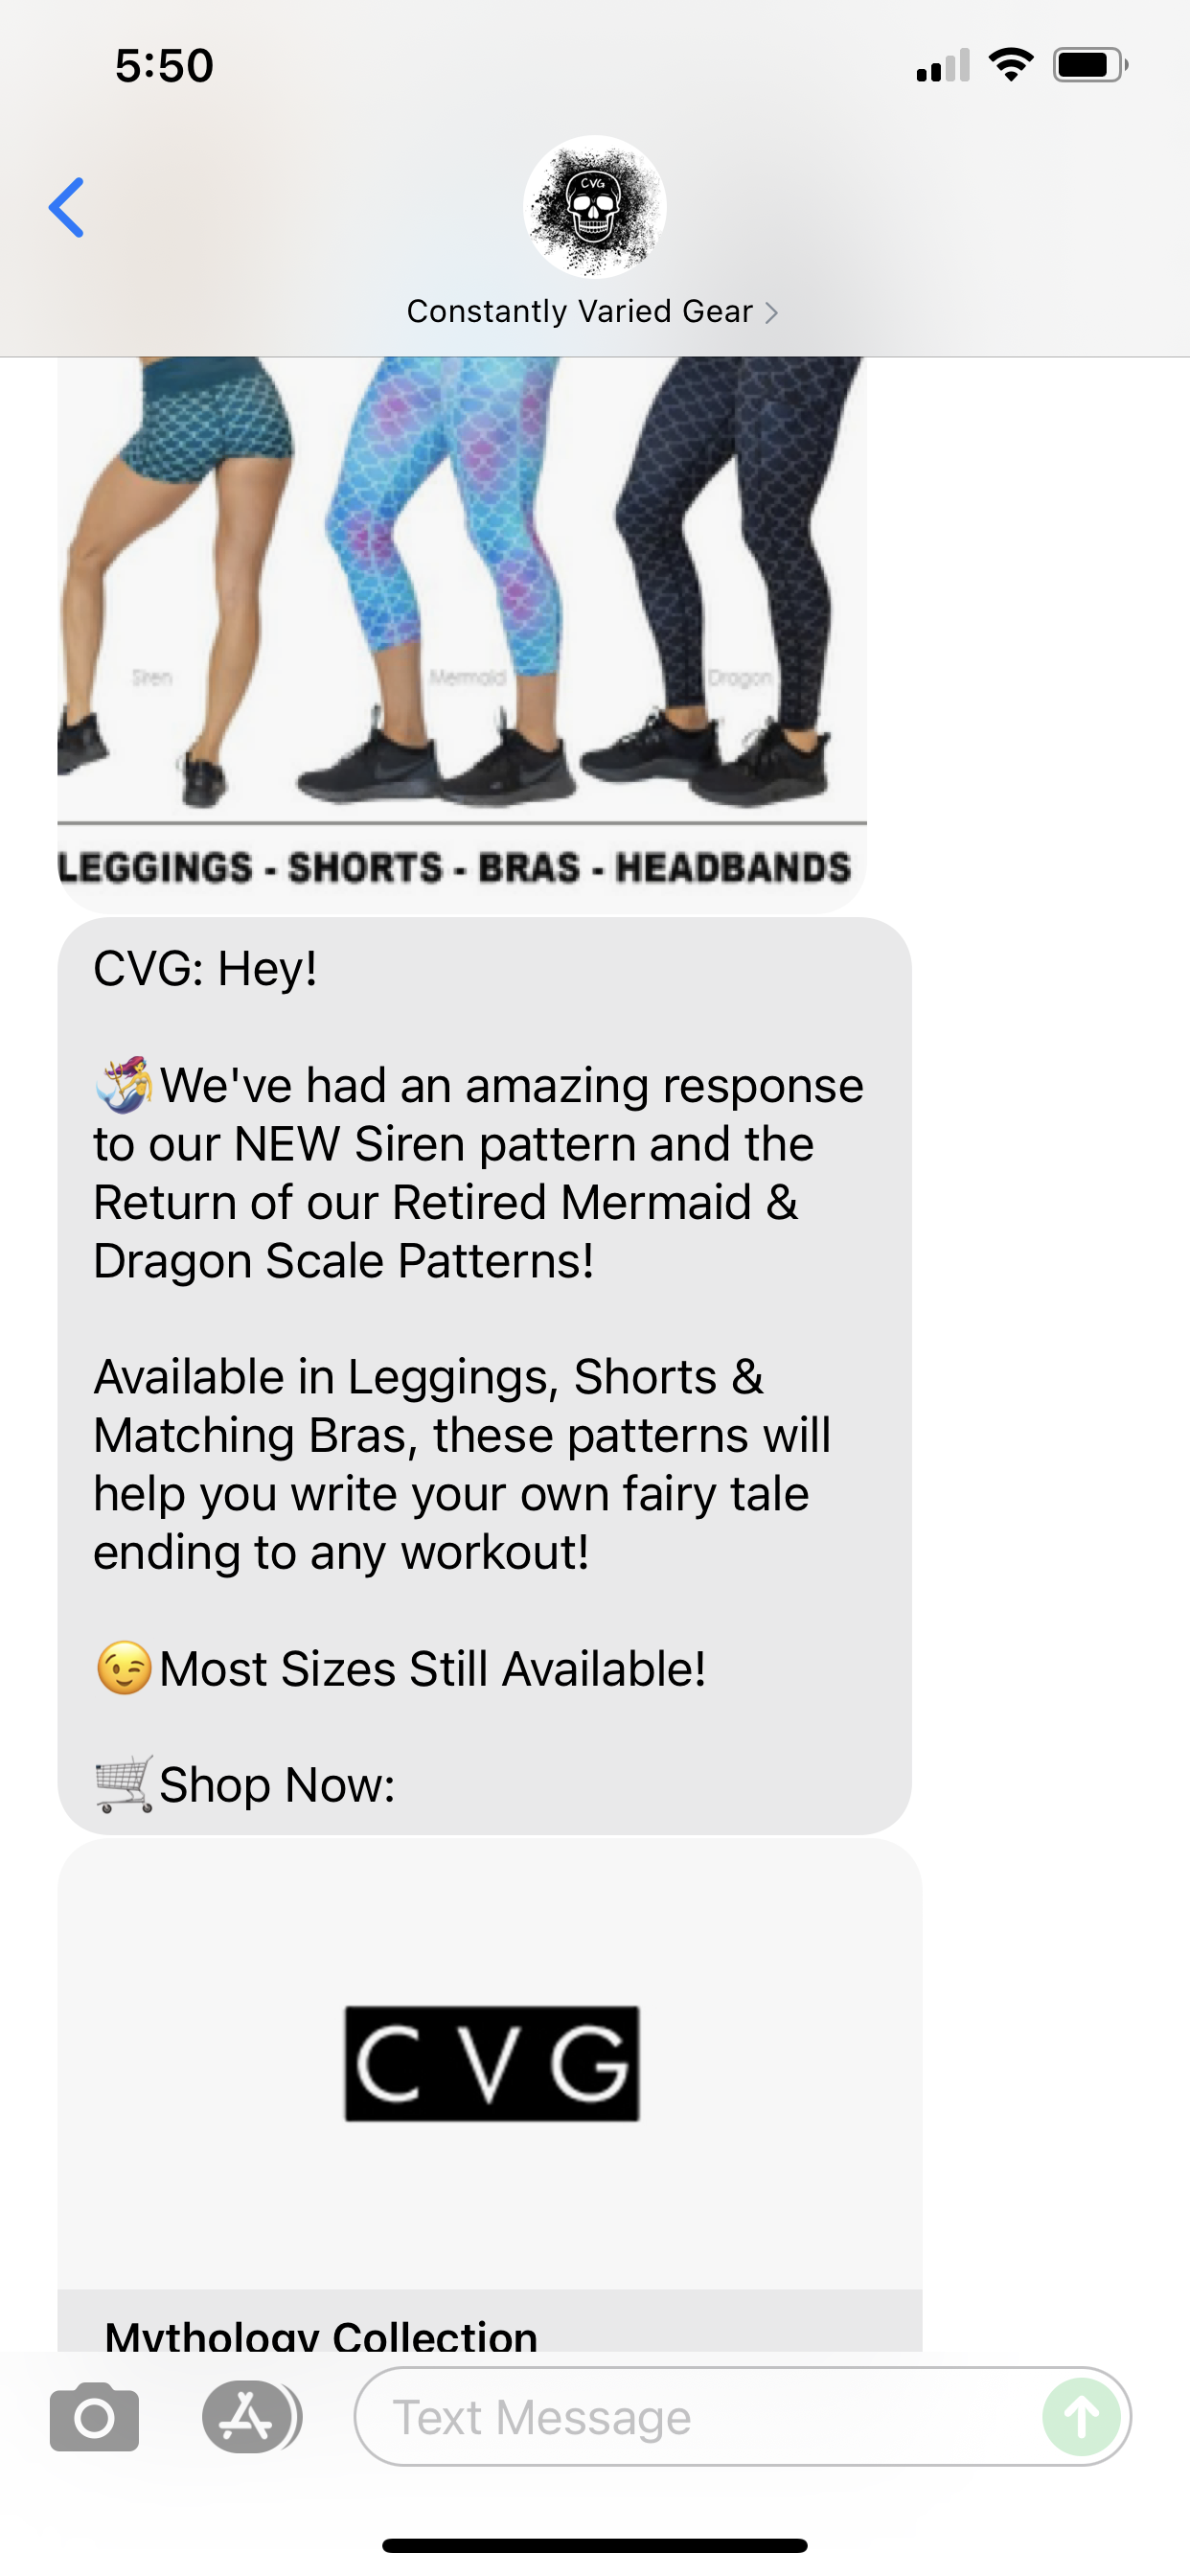 https://smsarchives.com/wp-content/uploads/2021/08/Constantly-Varied-Gear-Text-Message-Marketing-Example-08.27.2021.png